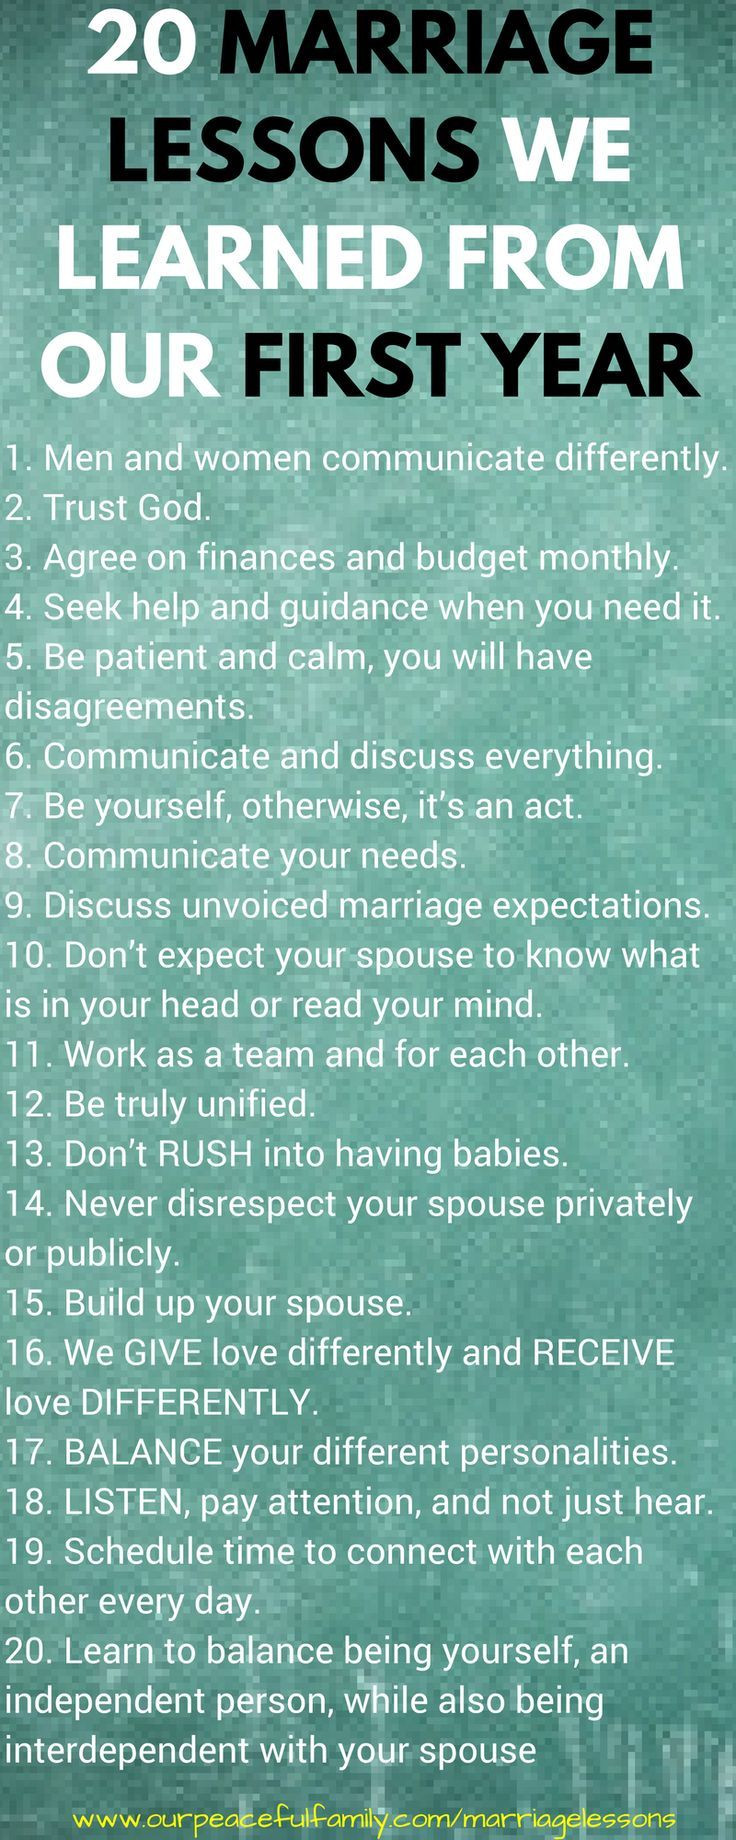 Quotes For Marriage
 20 Marriage Lessons We Learned From Our First Year of